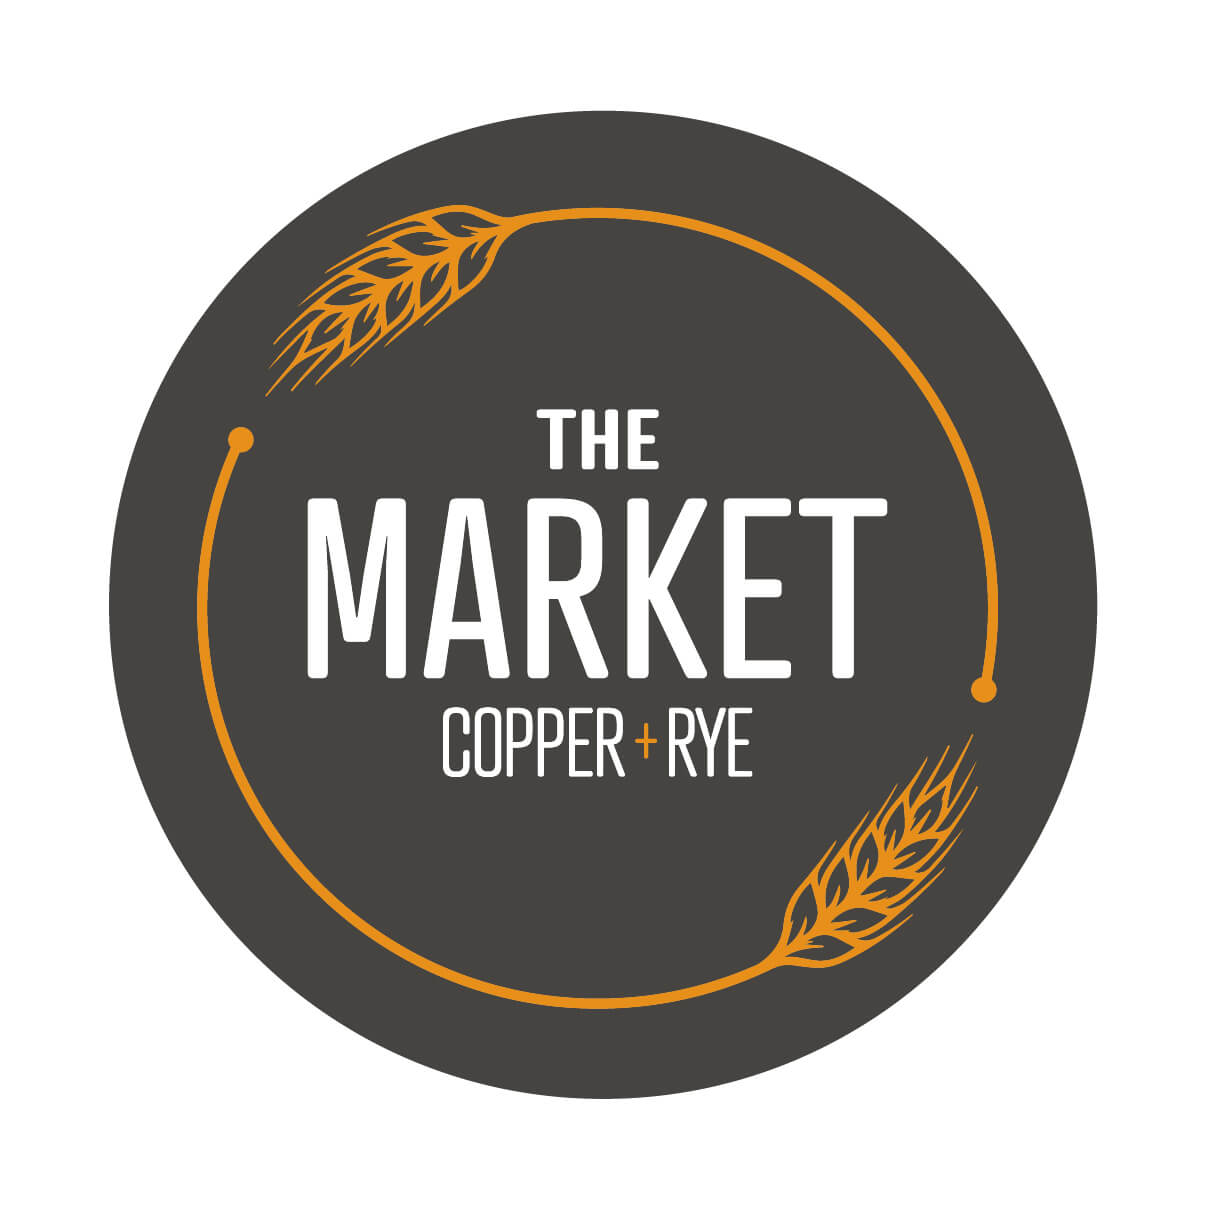 The Market at Copper + Rye